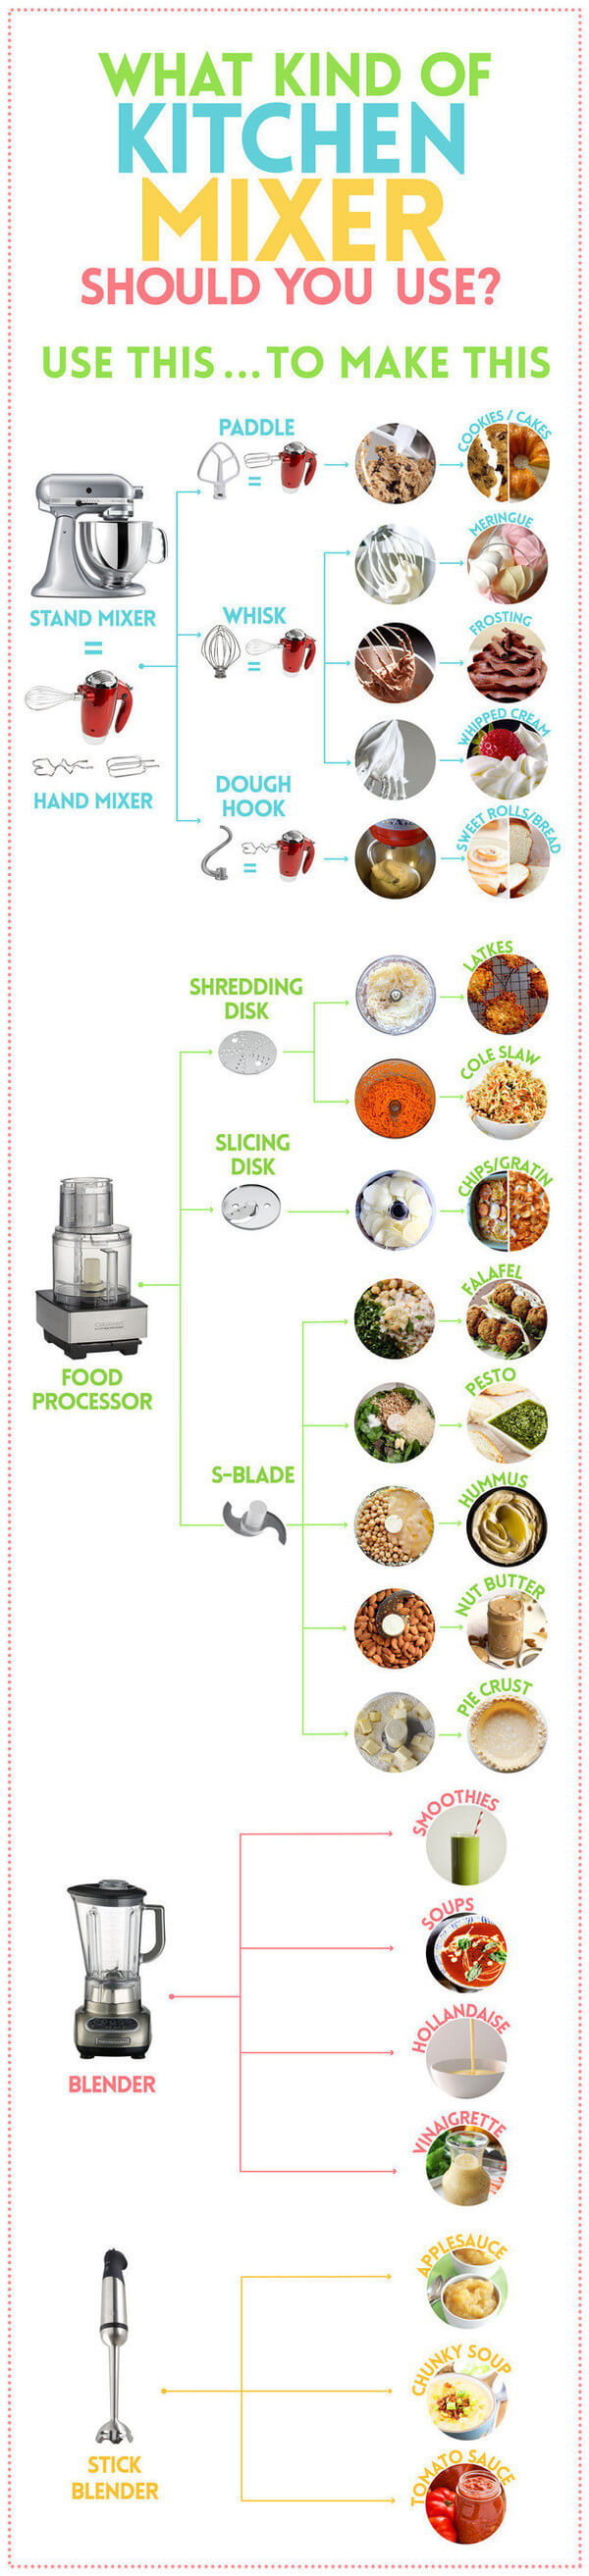 info-graphics for better cooking 12